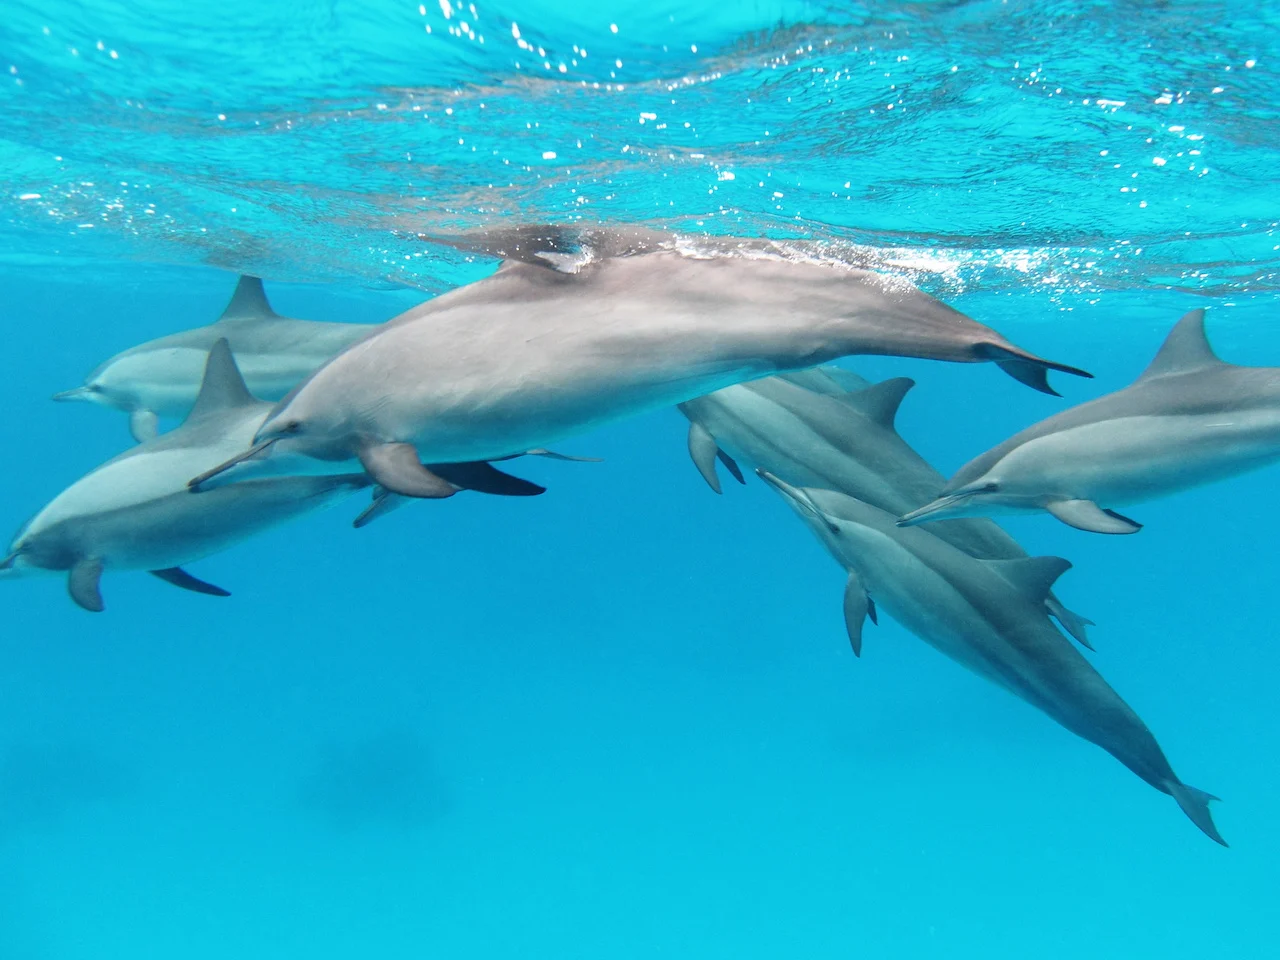 Social distance: New rule bans closeness to these Hawaiian dolphins